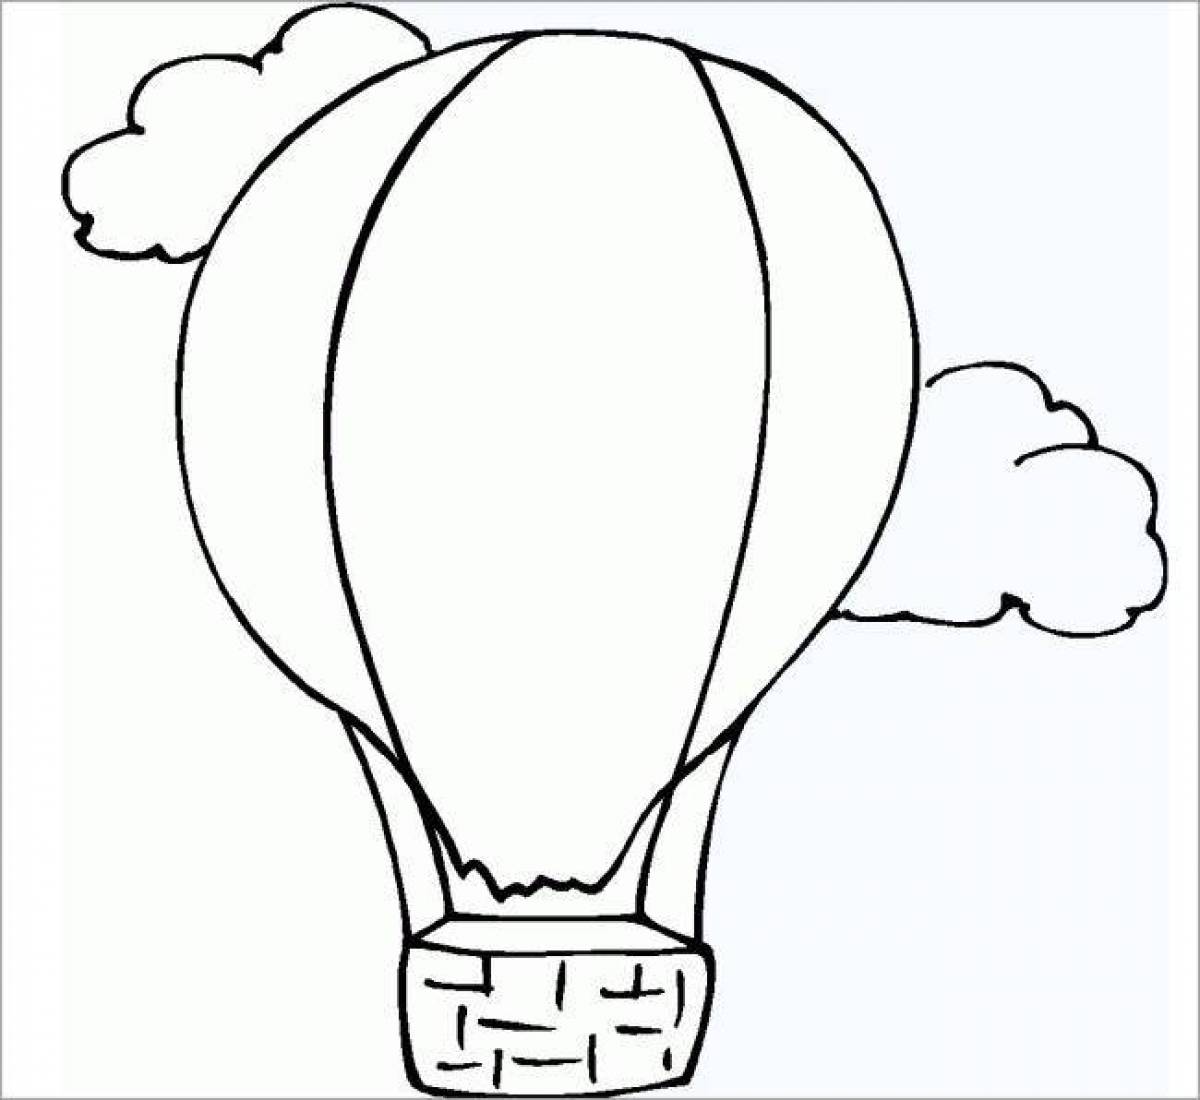 Great balloon coloring book